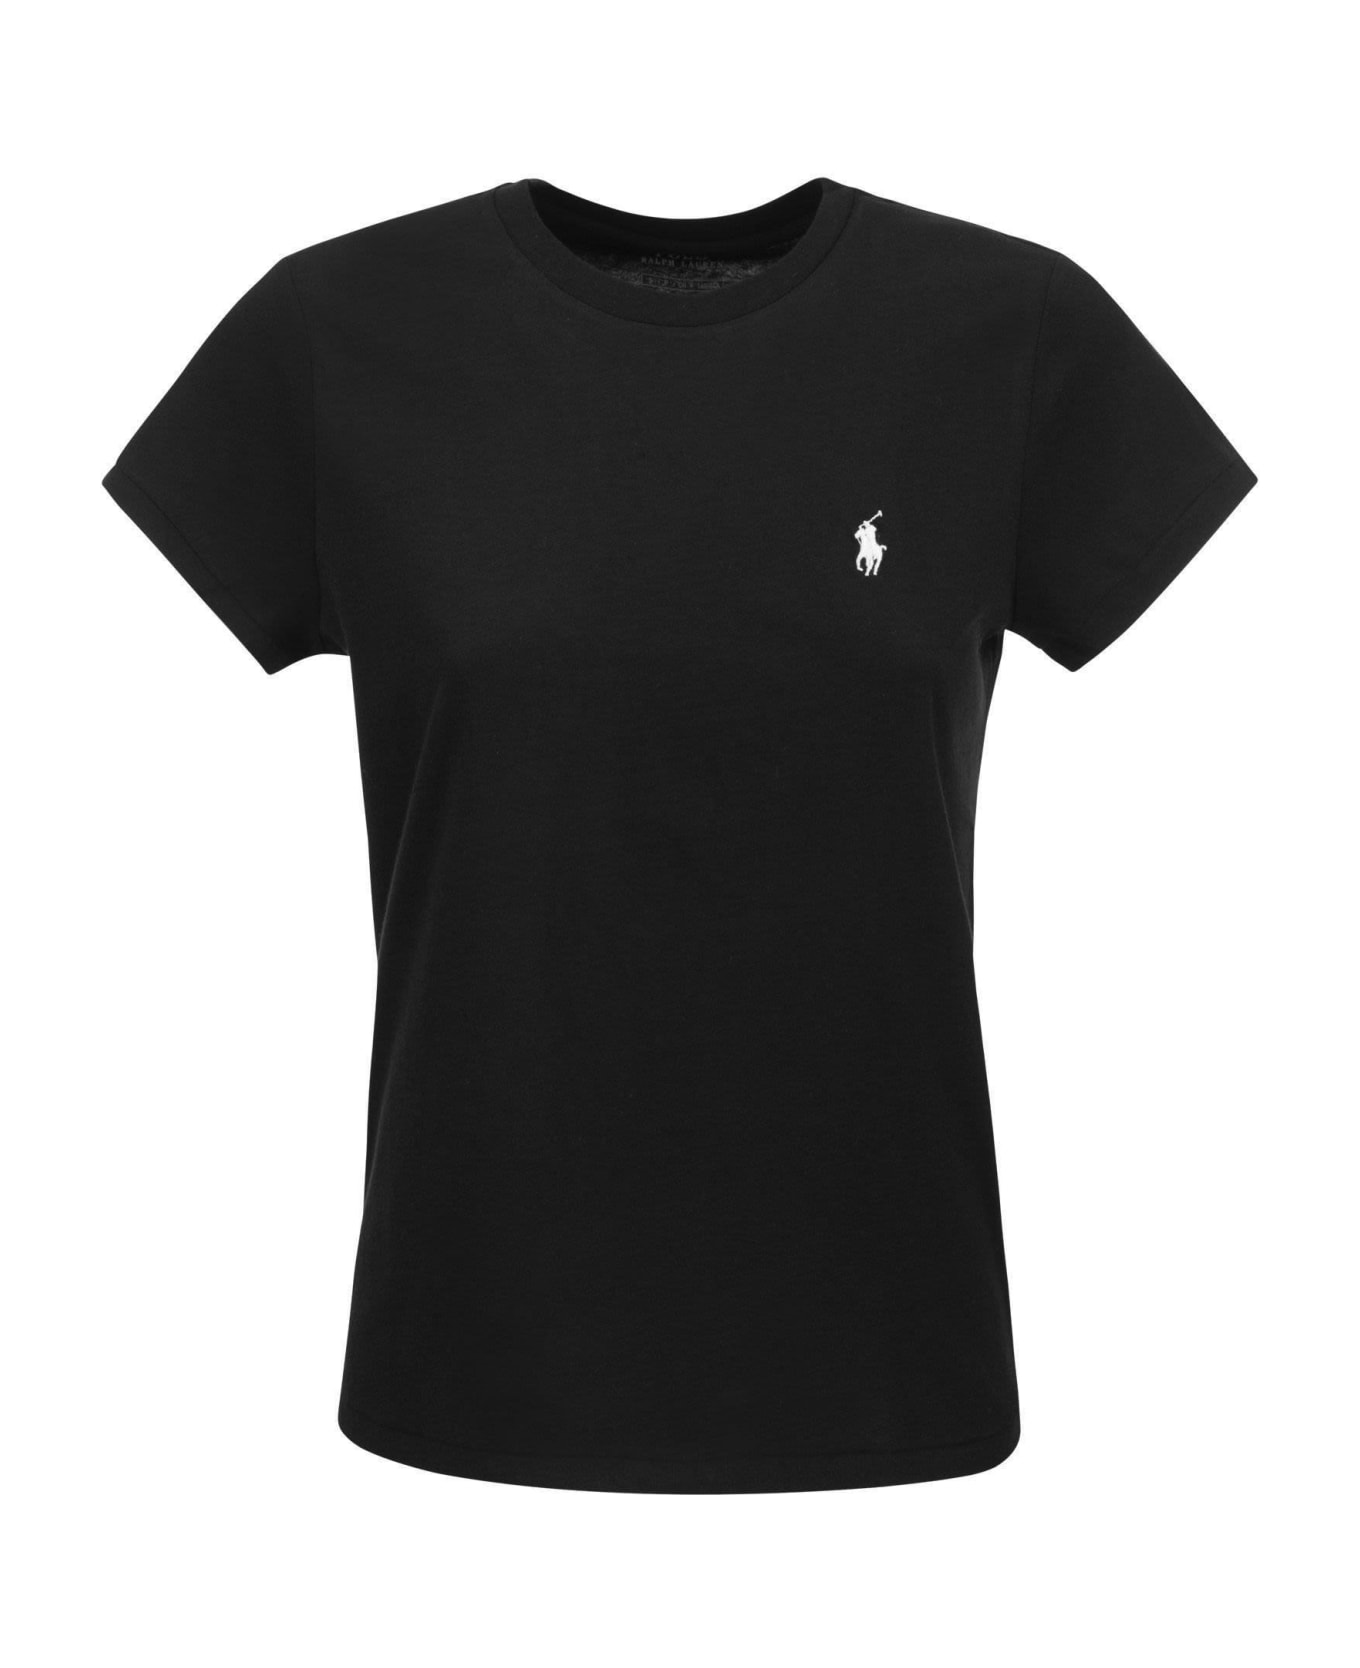 Polo Ralph Lauren Black T-shirt With Contrasting Pony - Black